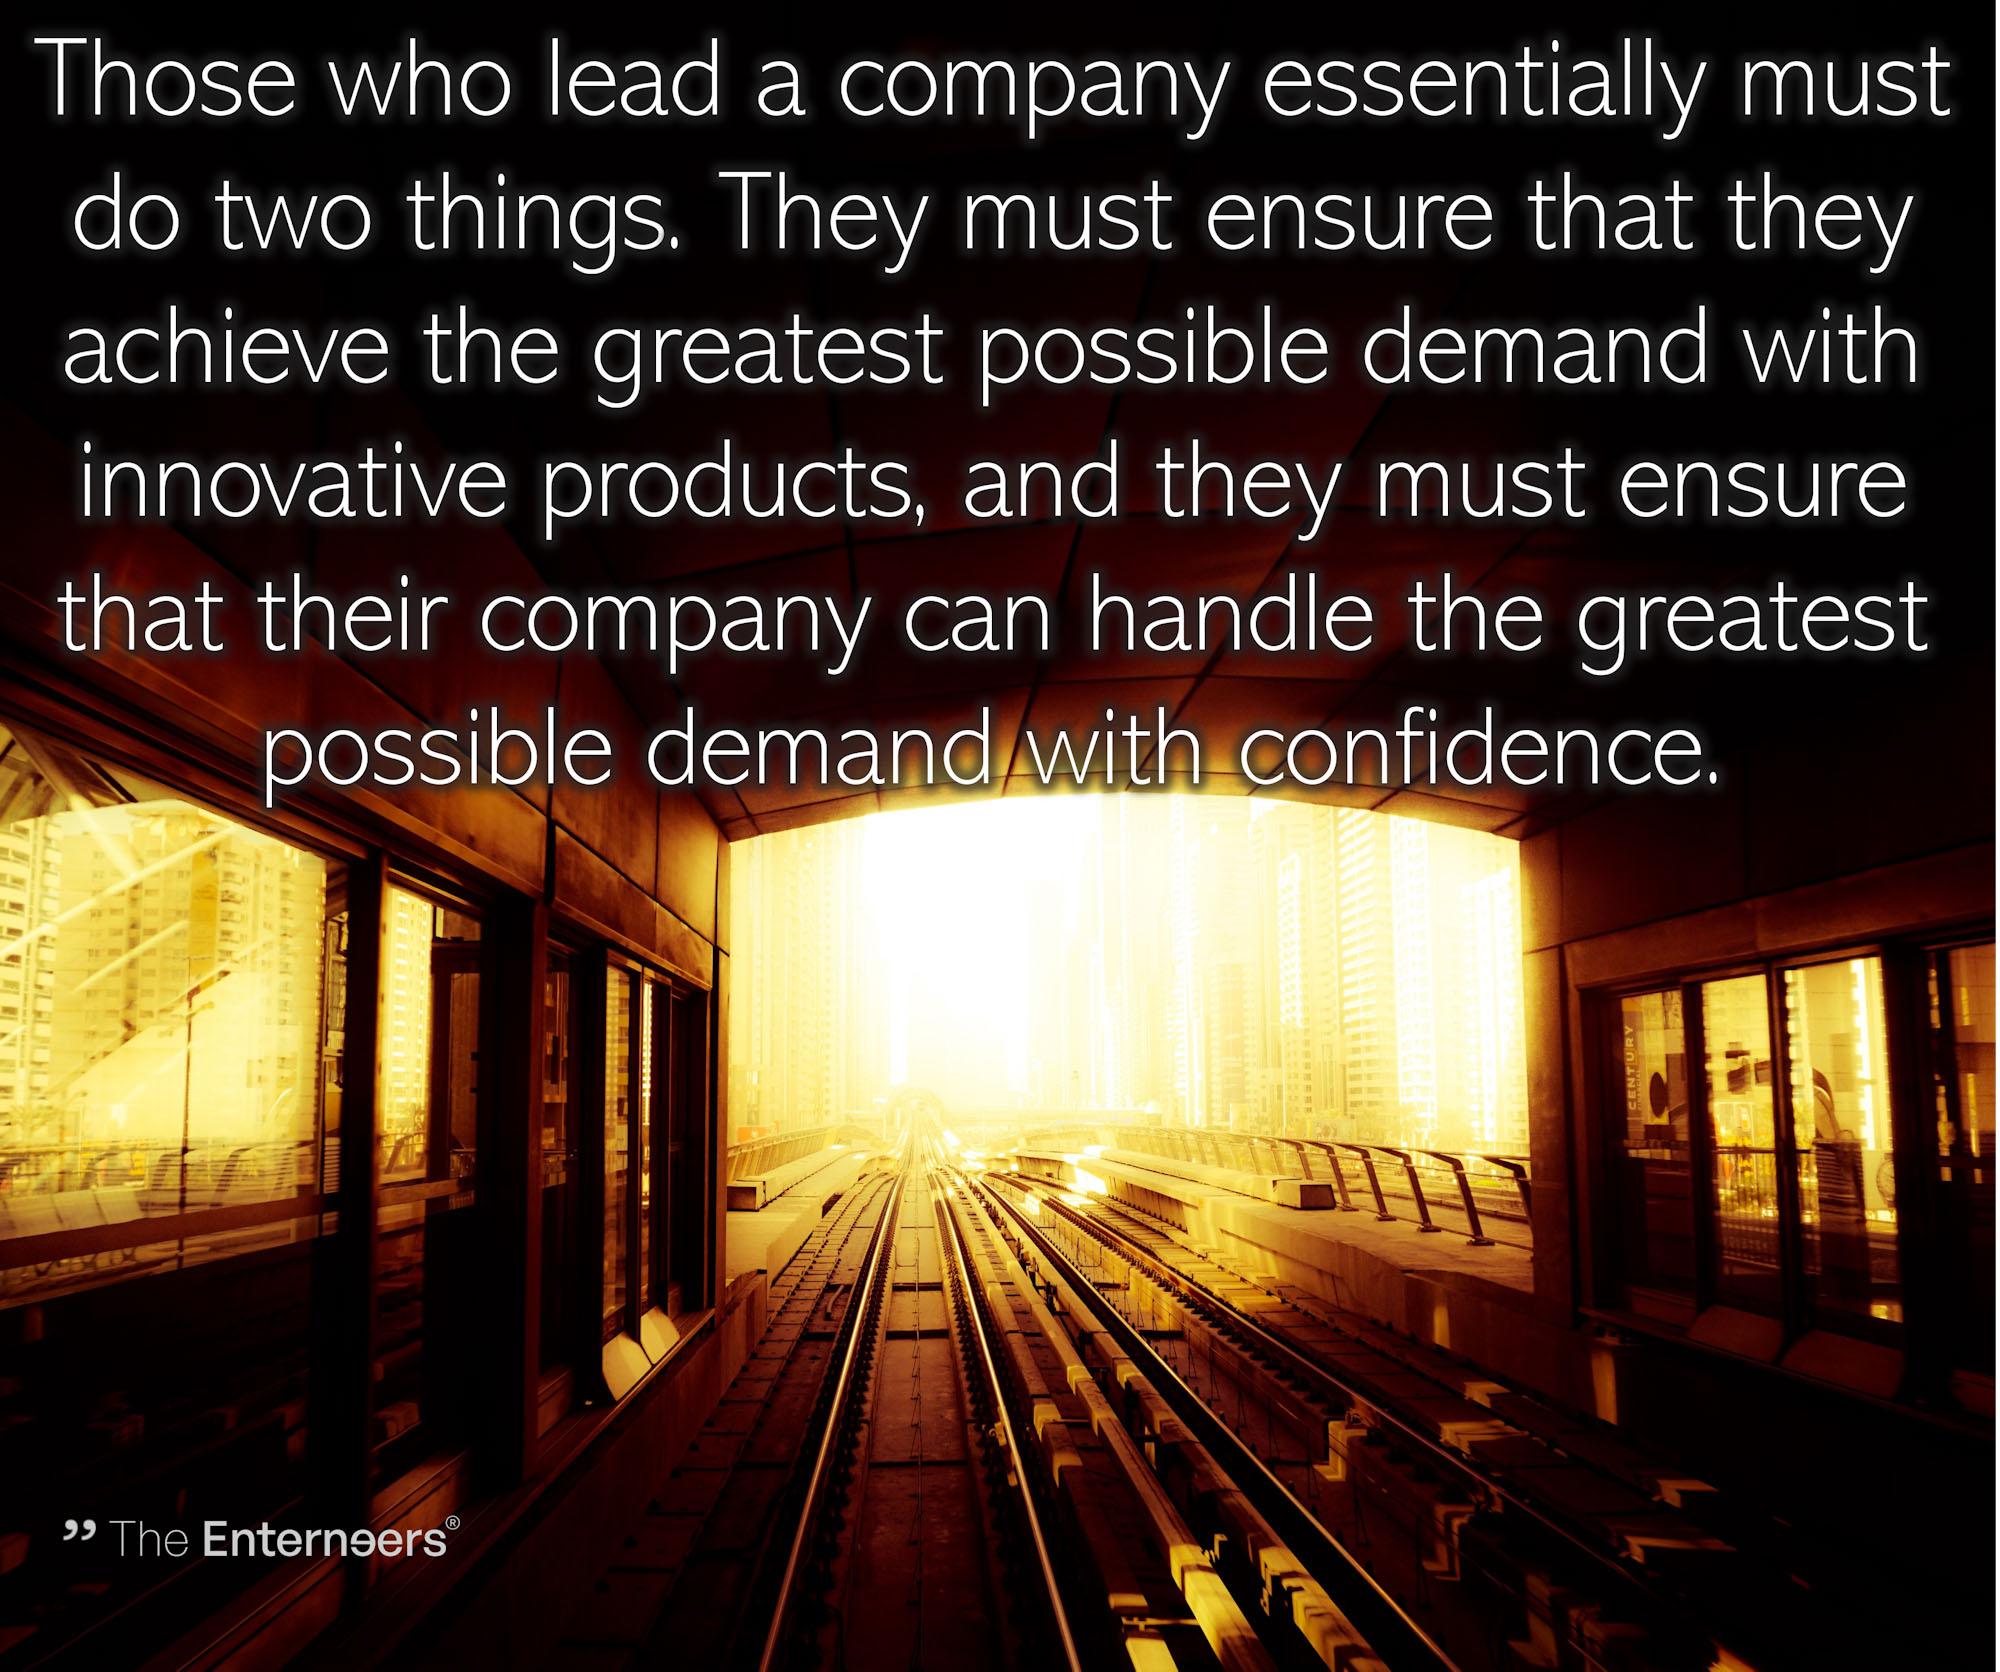 Entrepreneurs can achieve and handle the greatest possible demand 